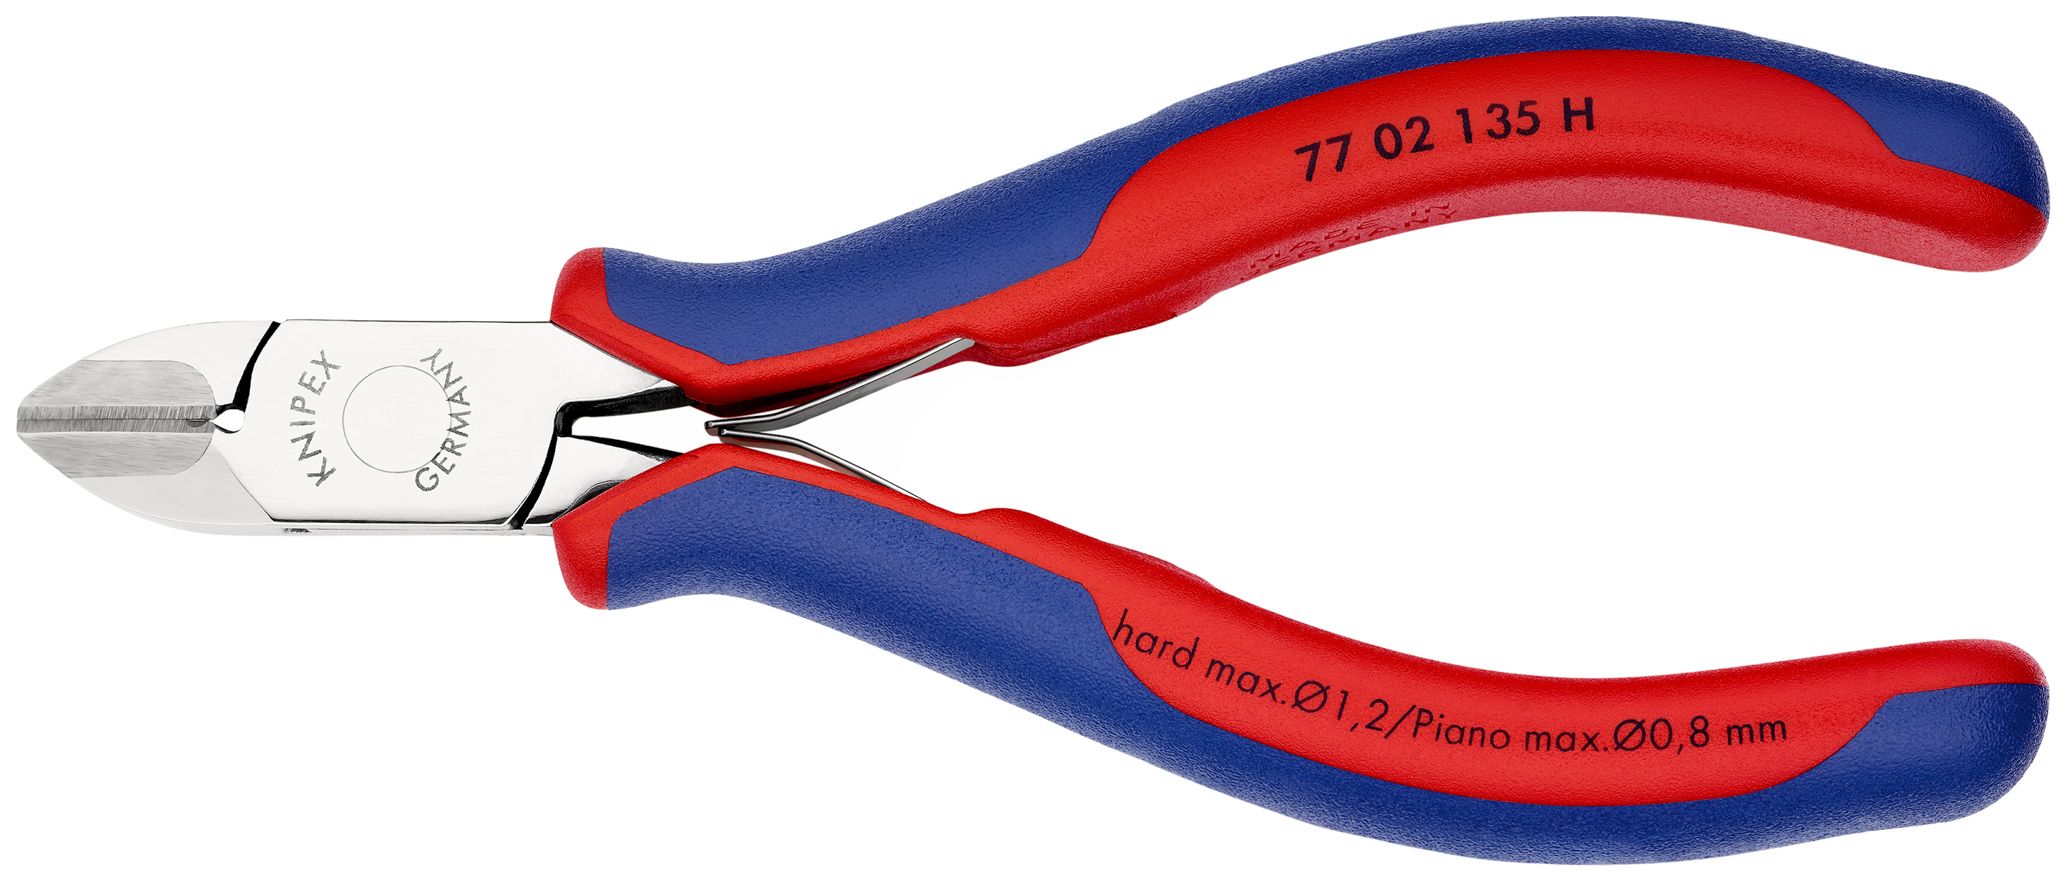 Pnce coupante carbure cote electro 135mm KNIPEX - 77 02 135 H